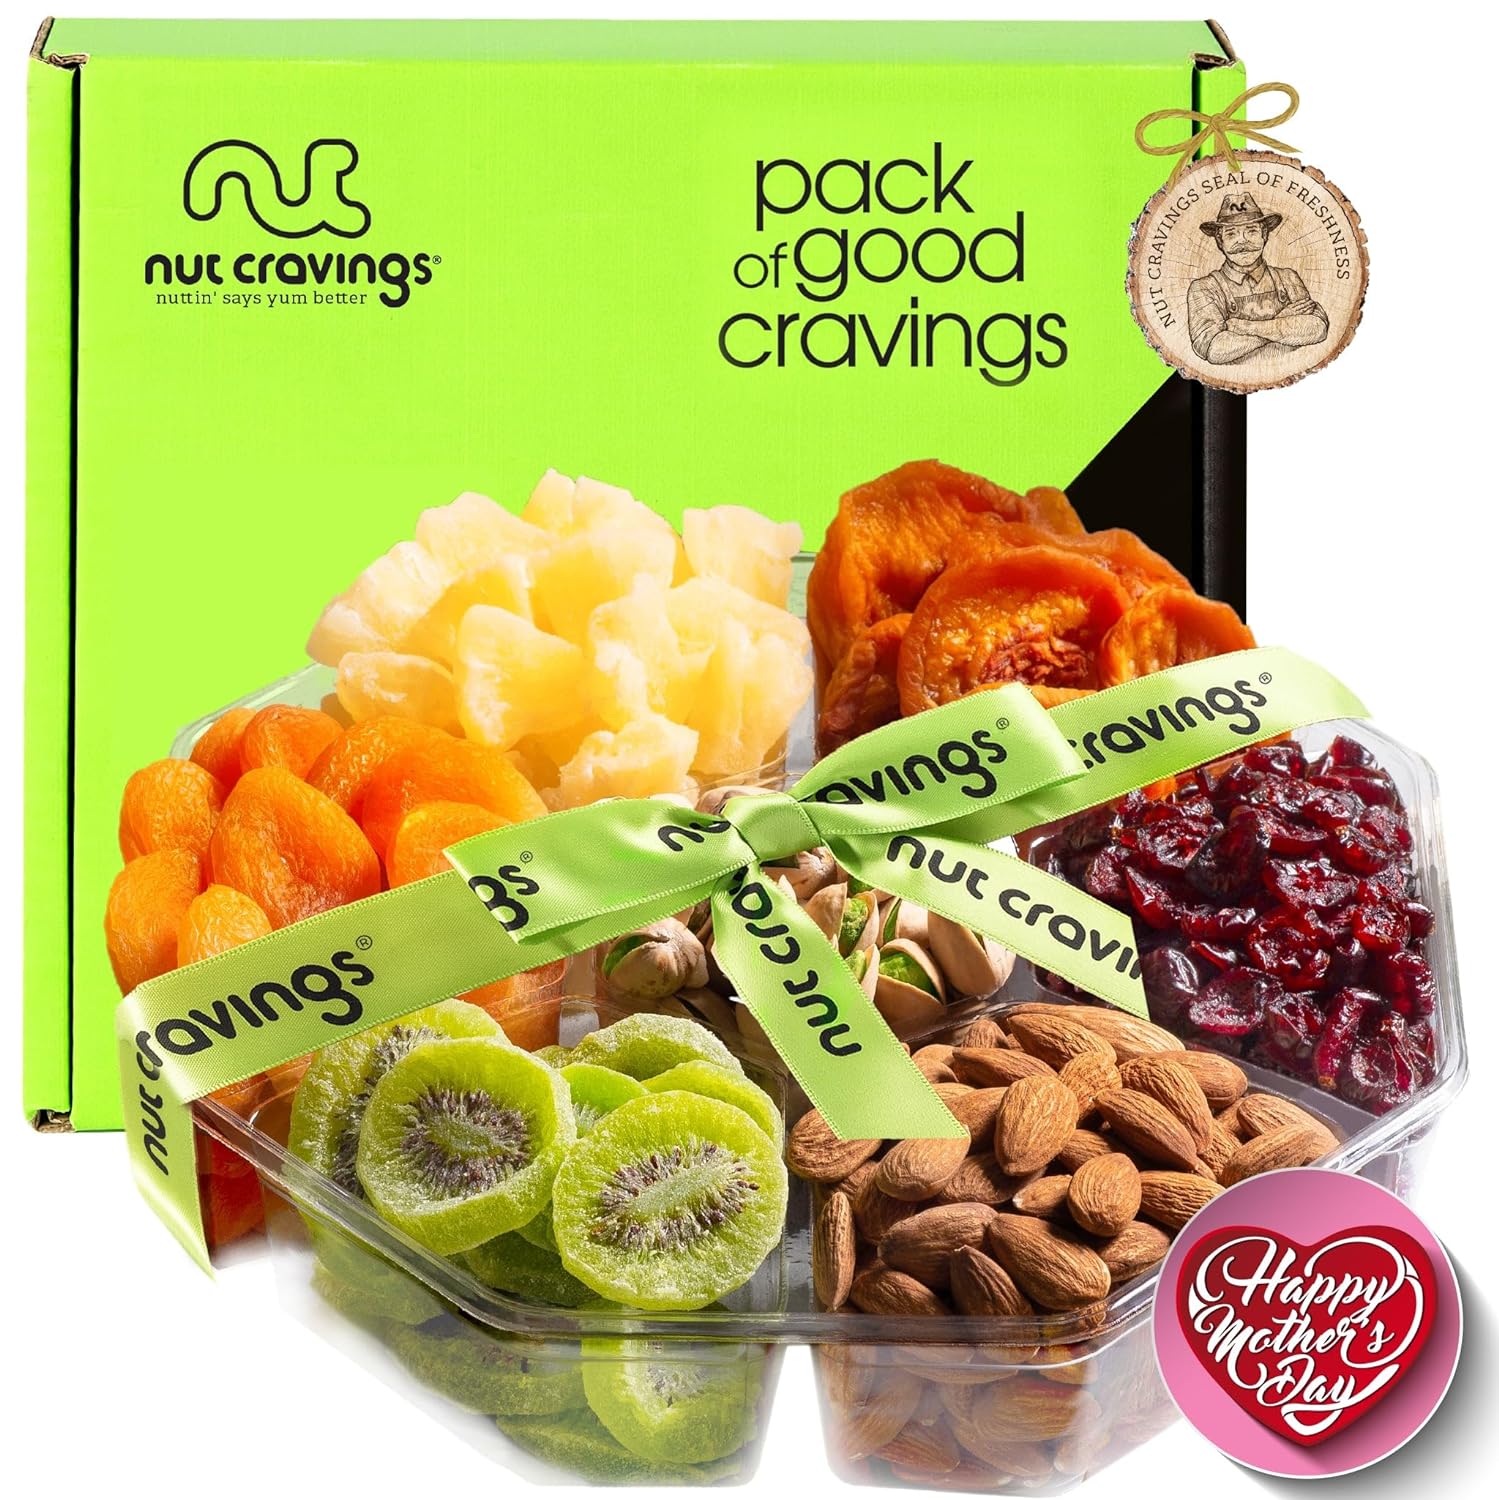 Nut Cravings Gourmet Collection - Mothers Day Dried Fruit & Mixed Nuts Gift Basket + Green Ribbon (7 Assortments, 2 LB) Arrangement Platter, Birthday Care Package - Healthy Kosher